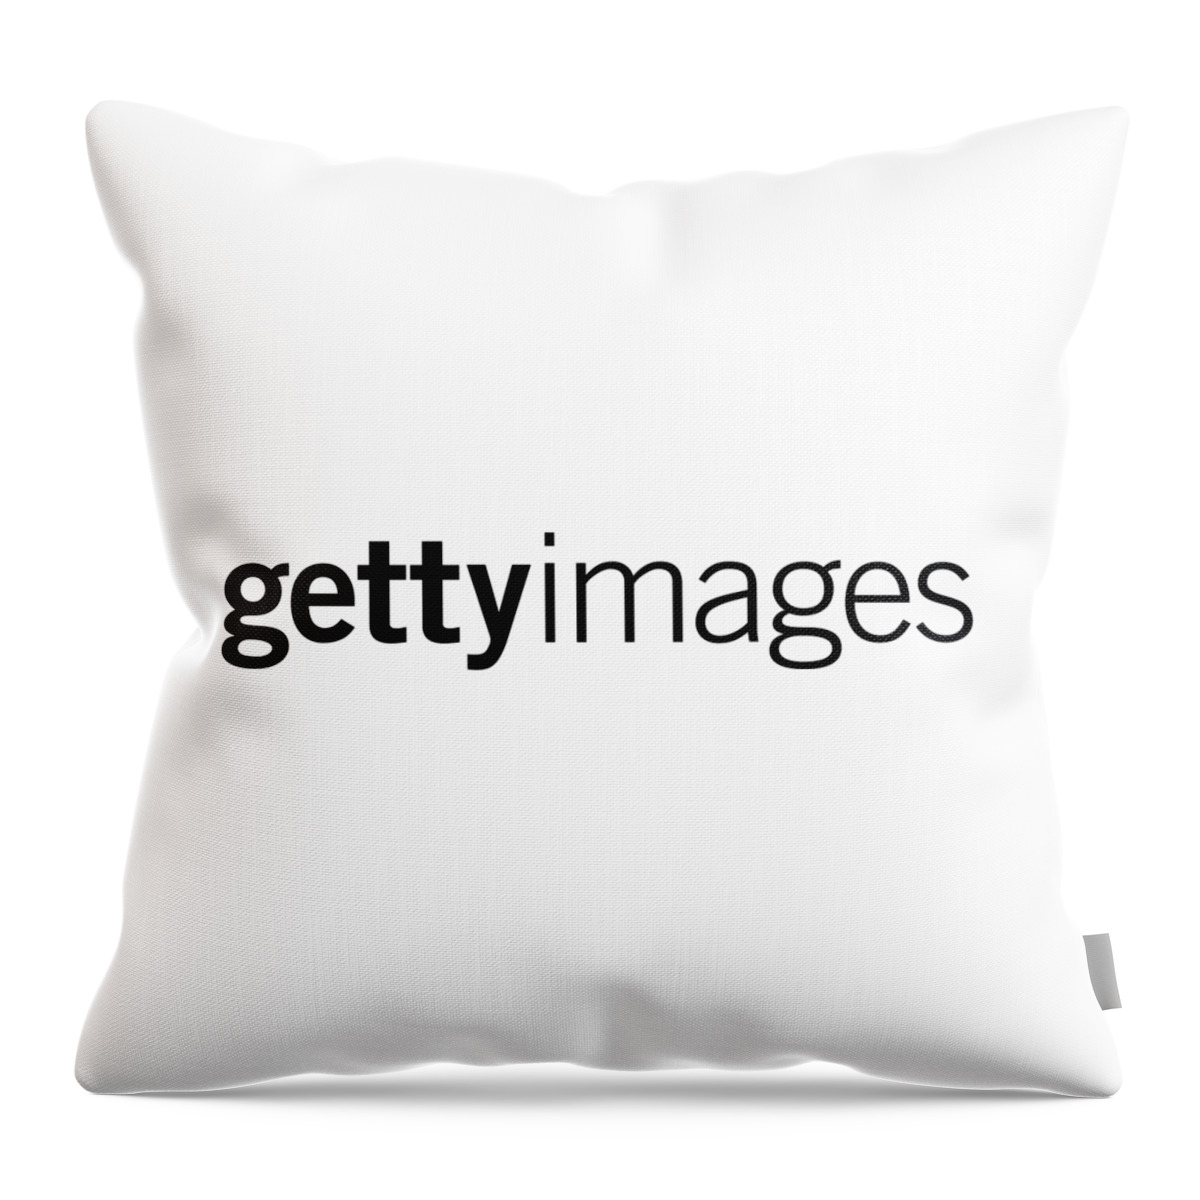 Getty Images Logo Throw Pillow featuring the digital art Getty Images Logo by Getty Images